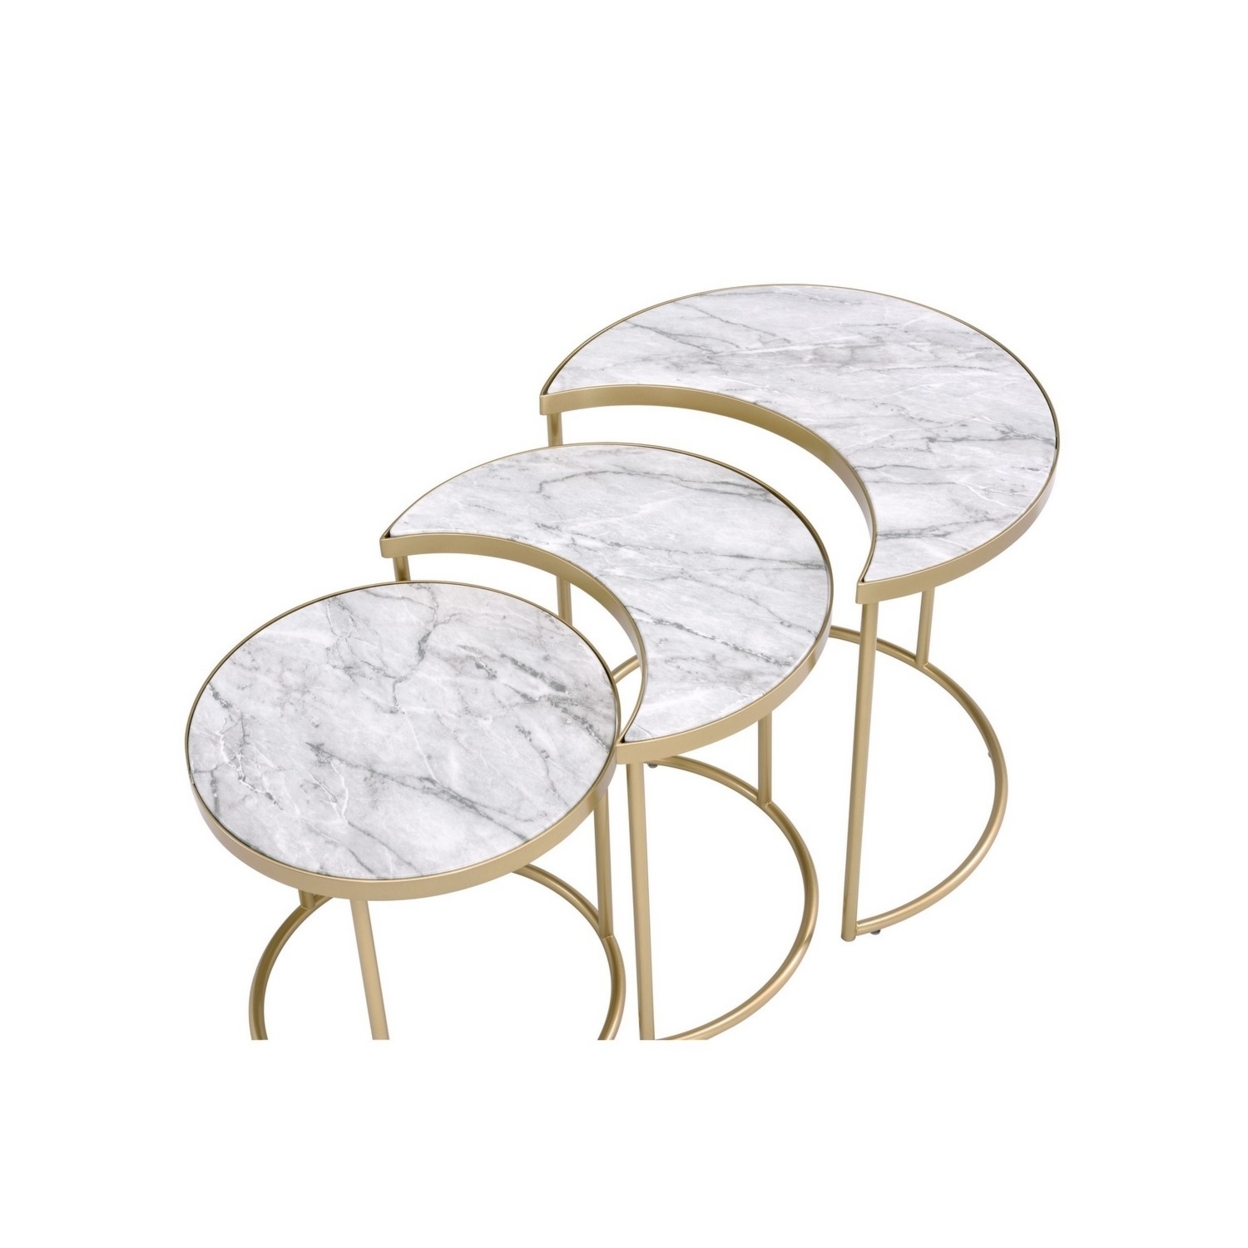 Metal Nesting Coffee Table With Faux Marble Top, Set Of 3, Gold And White- Saltoro Sherpi